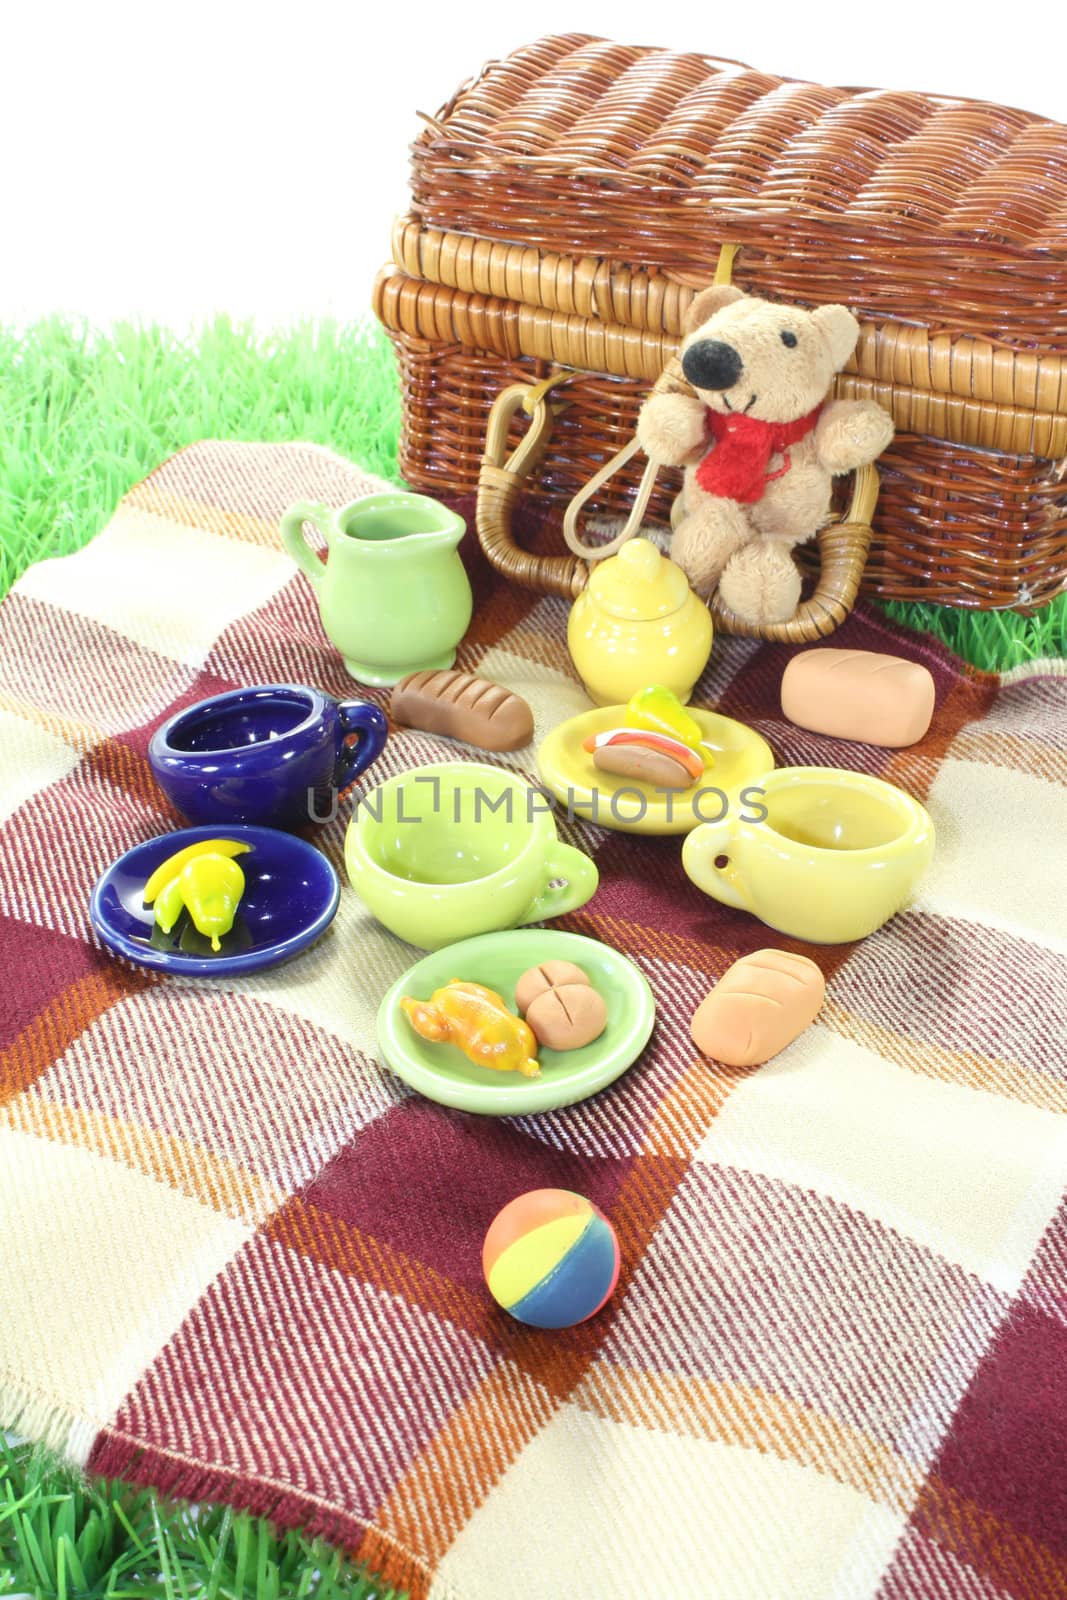 Picnic with family, ball, basket, blanket and dishes on a light background